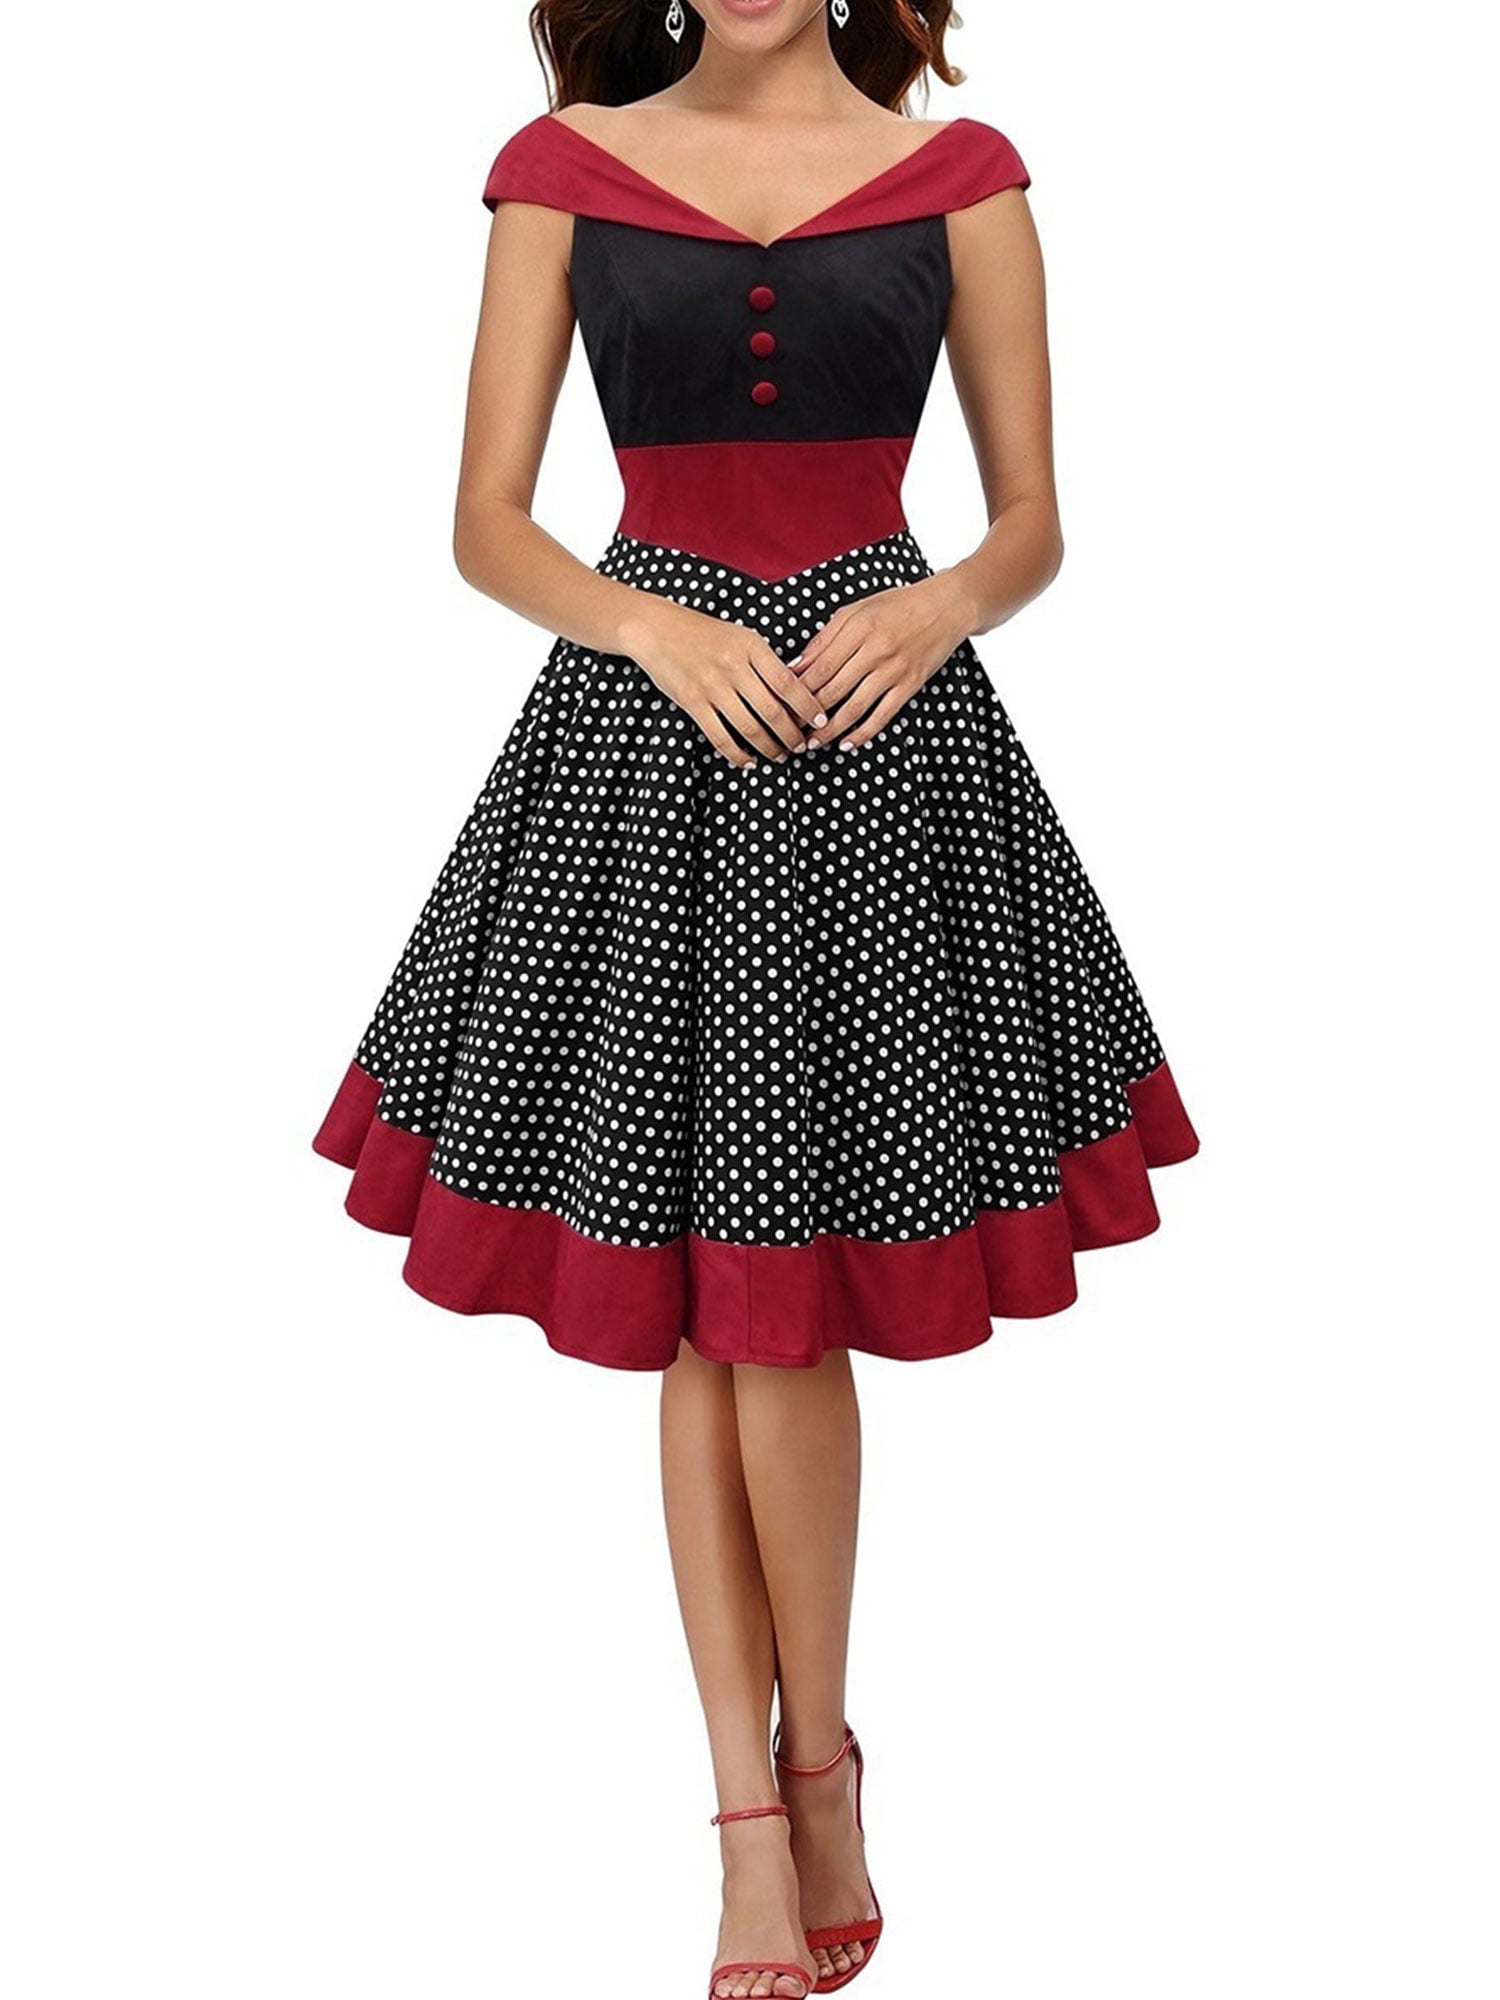 50s style christmas party dresses